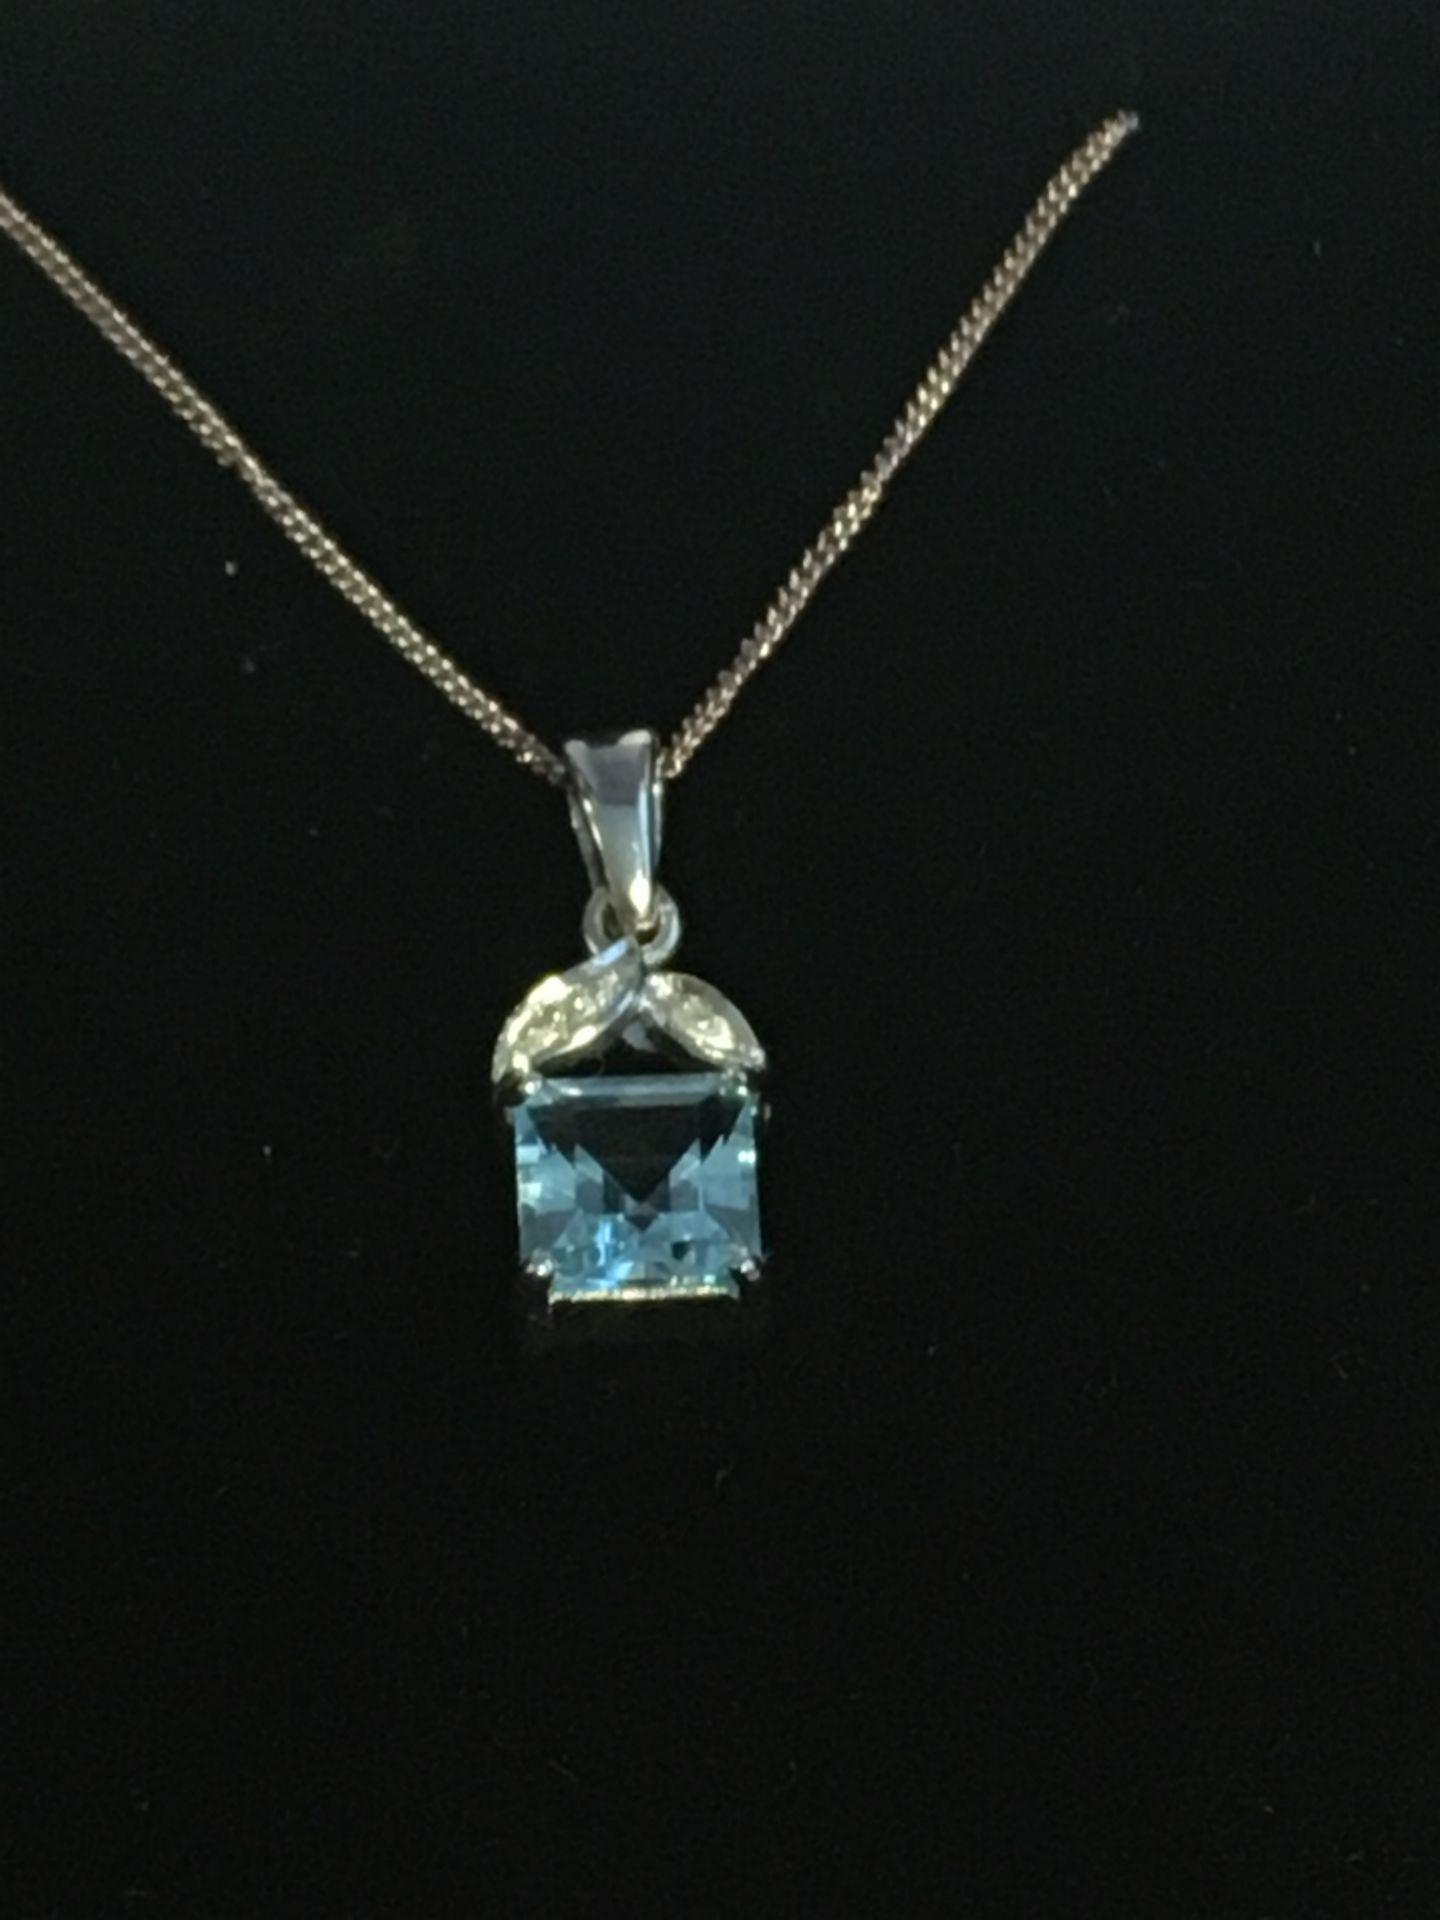 Sterling Silver Chain Stamped 925 with Aquamarine Stone Pendant - Image 2 of 2